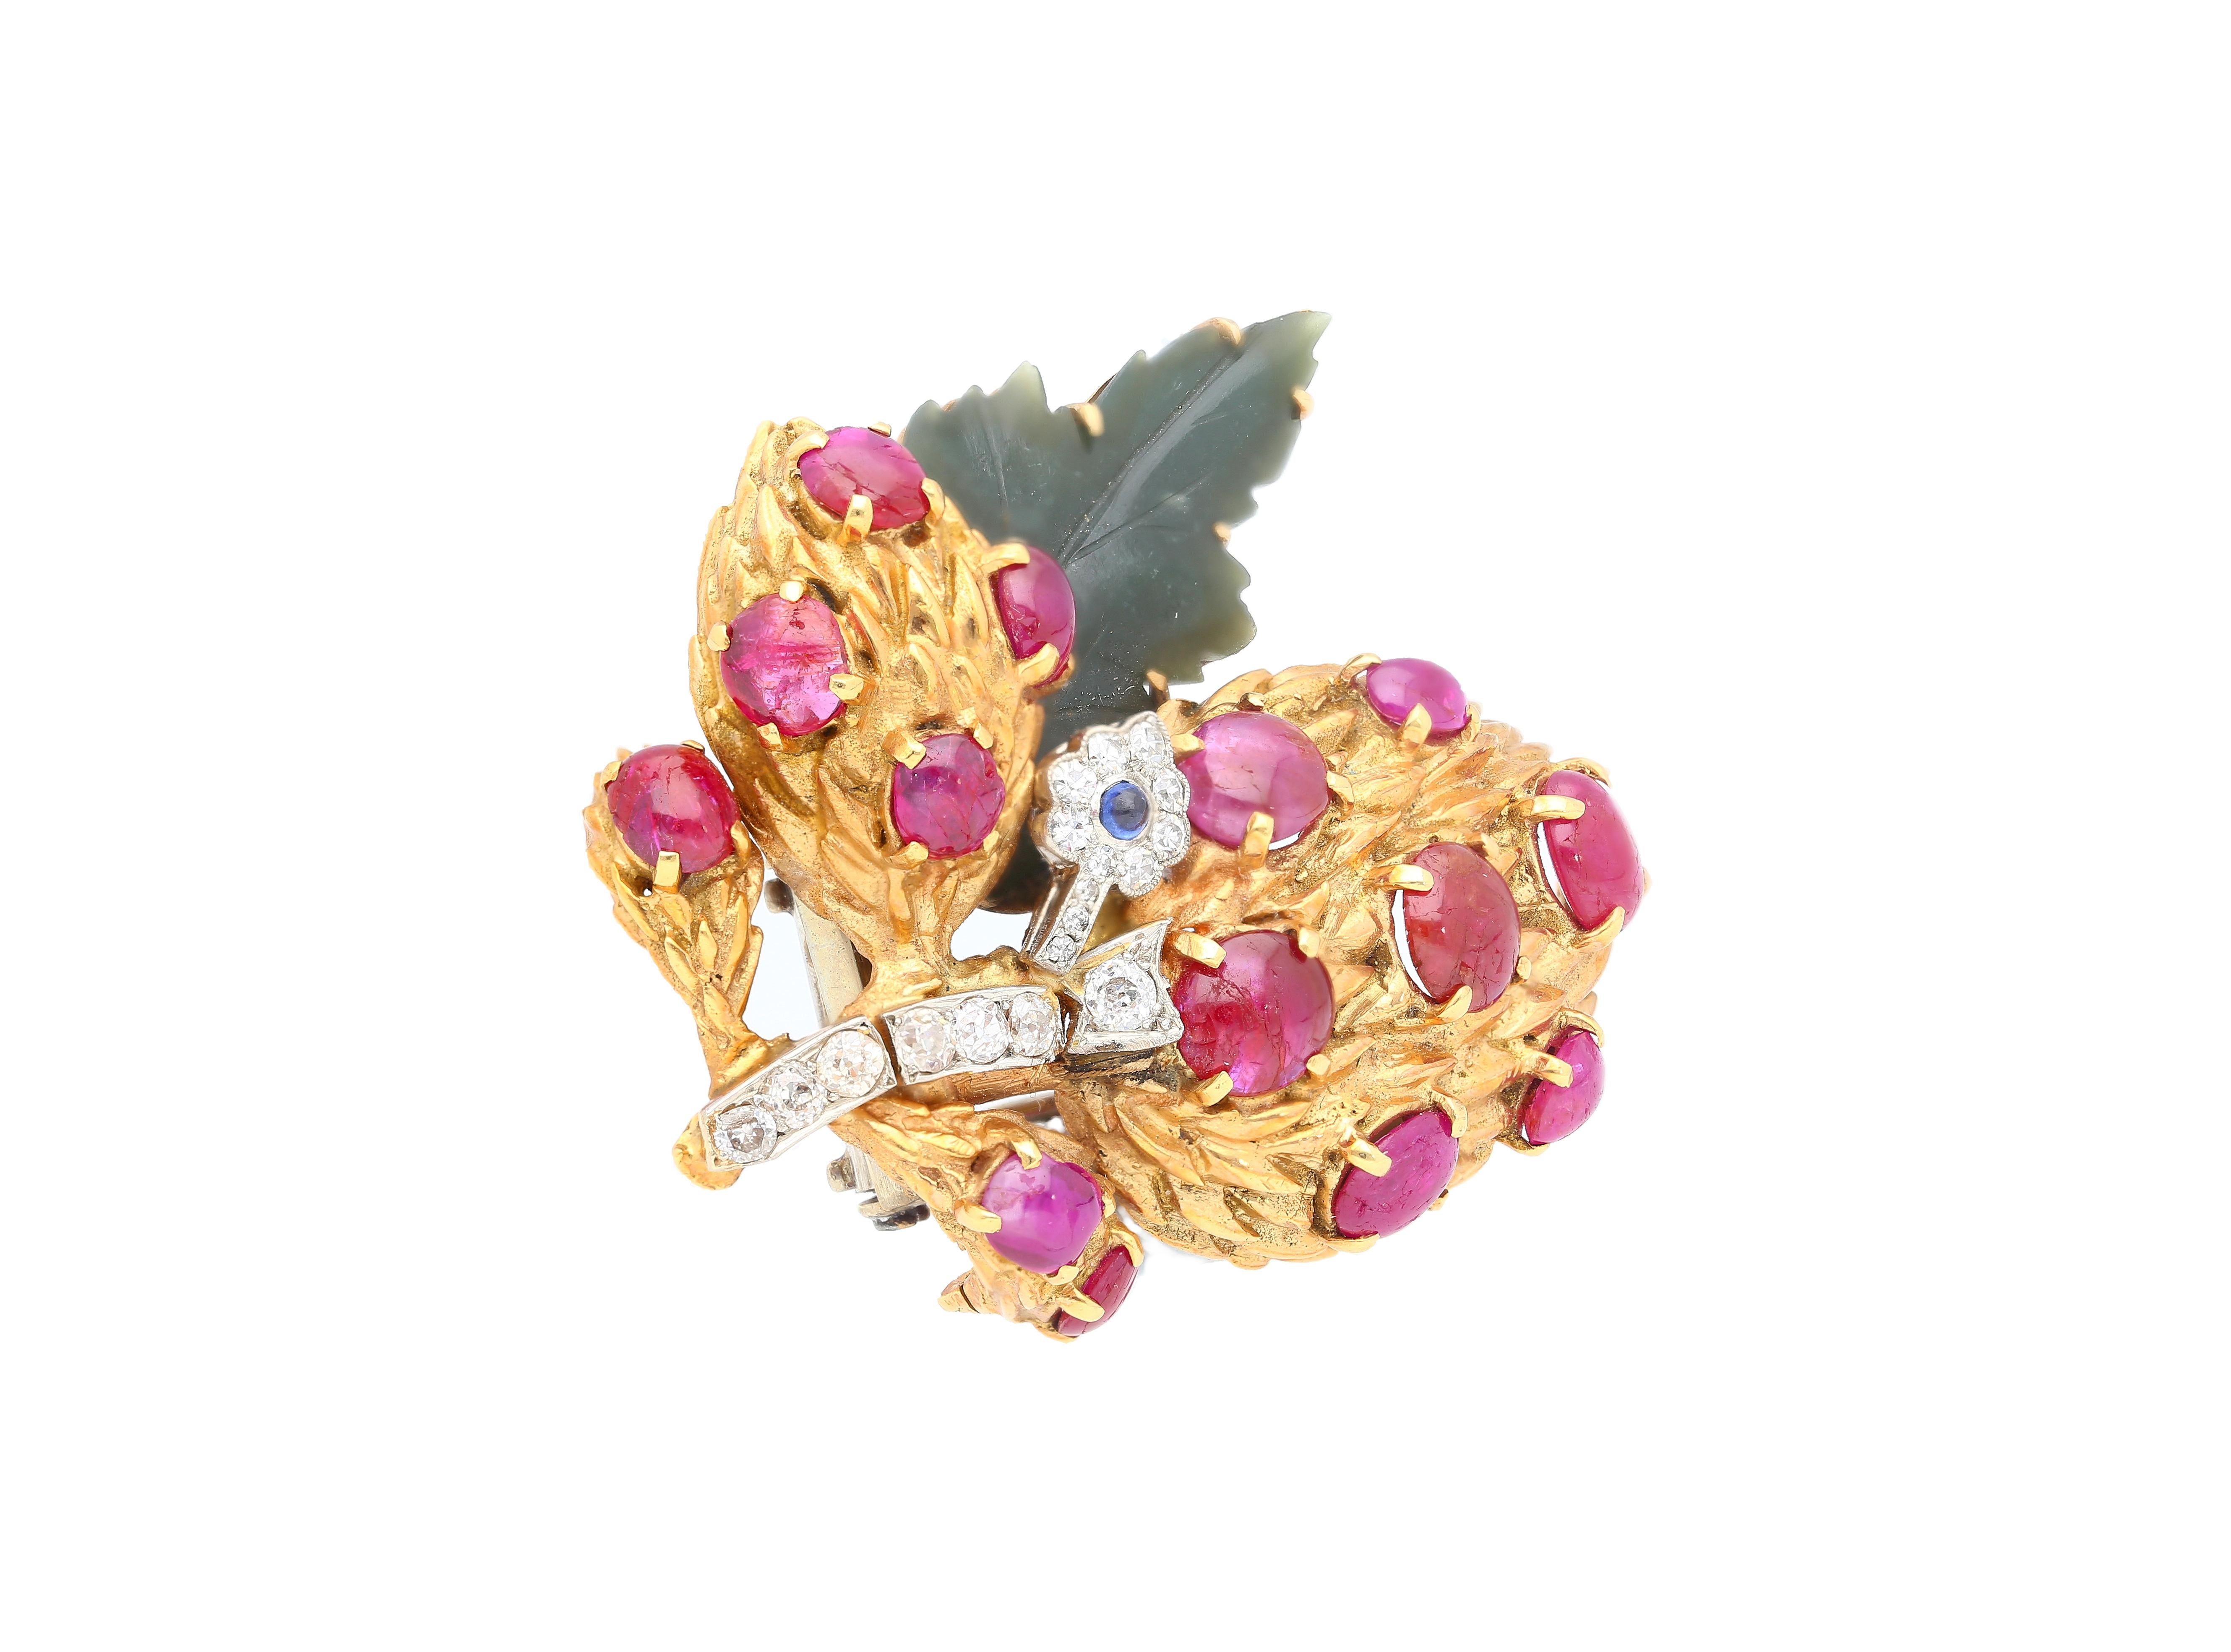 Jewelry Details:
Item Type: Brooch Pin
Metal Type: 18K Yellow Gold and Platinum
Weight: 35.70 grams

Center Stone Details:
Gemstone 1: Ruby (Cabochon-Cut) x 14
Gemstone 2: Sapphire (Cabochon-Cut) x 1
Gemstone 3: Carved Jade x 1
Gemstone 4: Diamonds